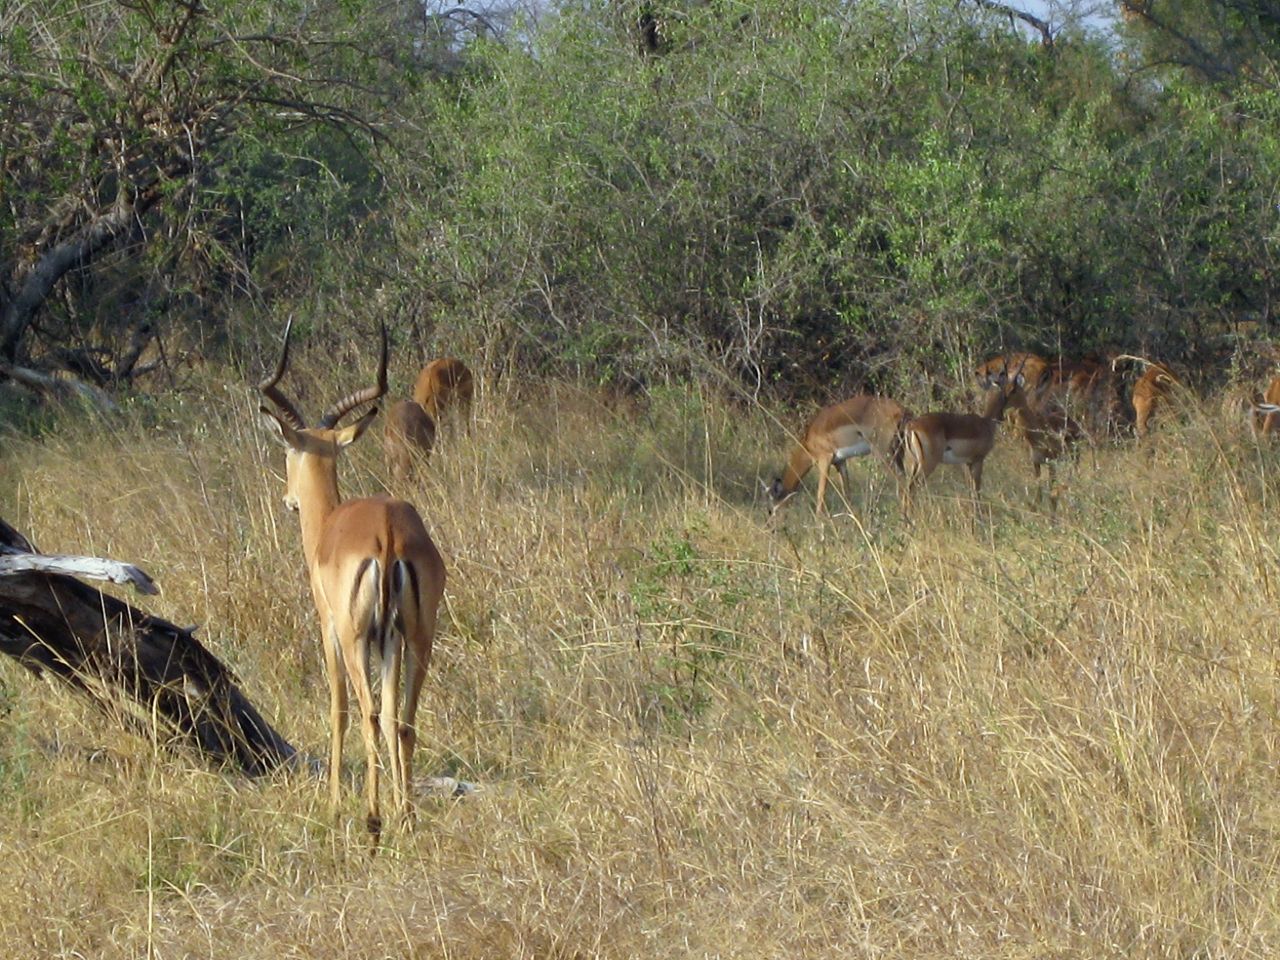 Impala are the dogs' target on this hunt.